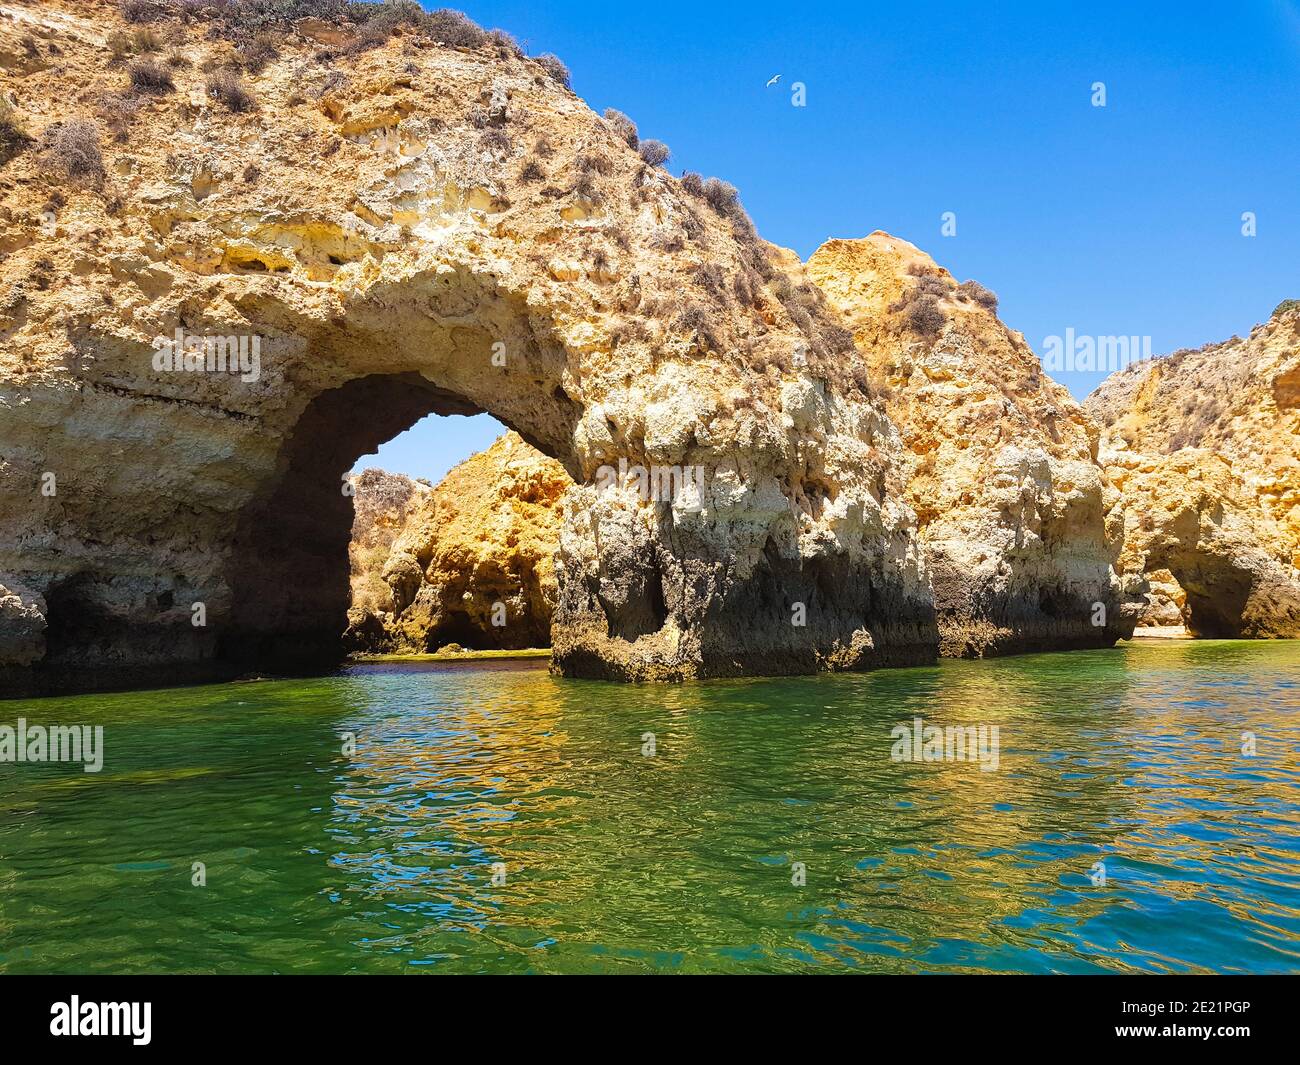 Arch formed in a sea cave in Algarve region of Portugal. Stock Photo